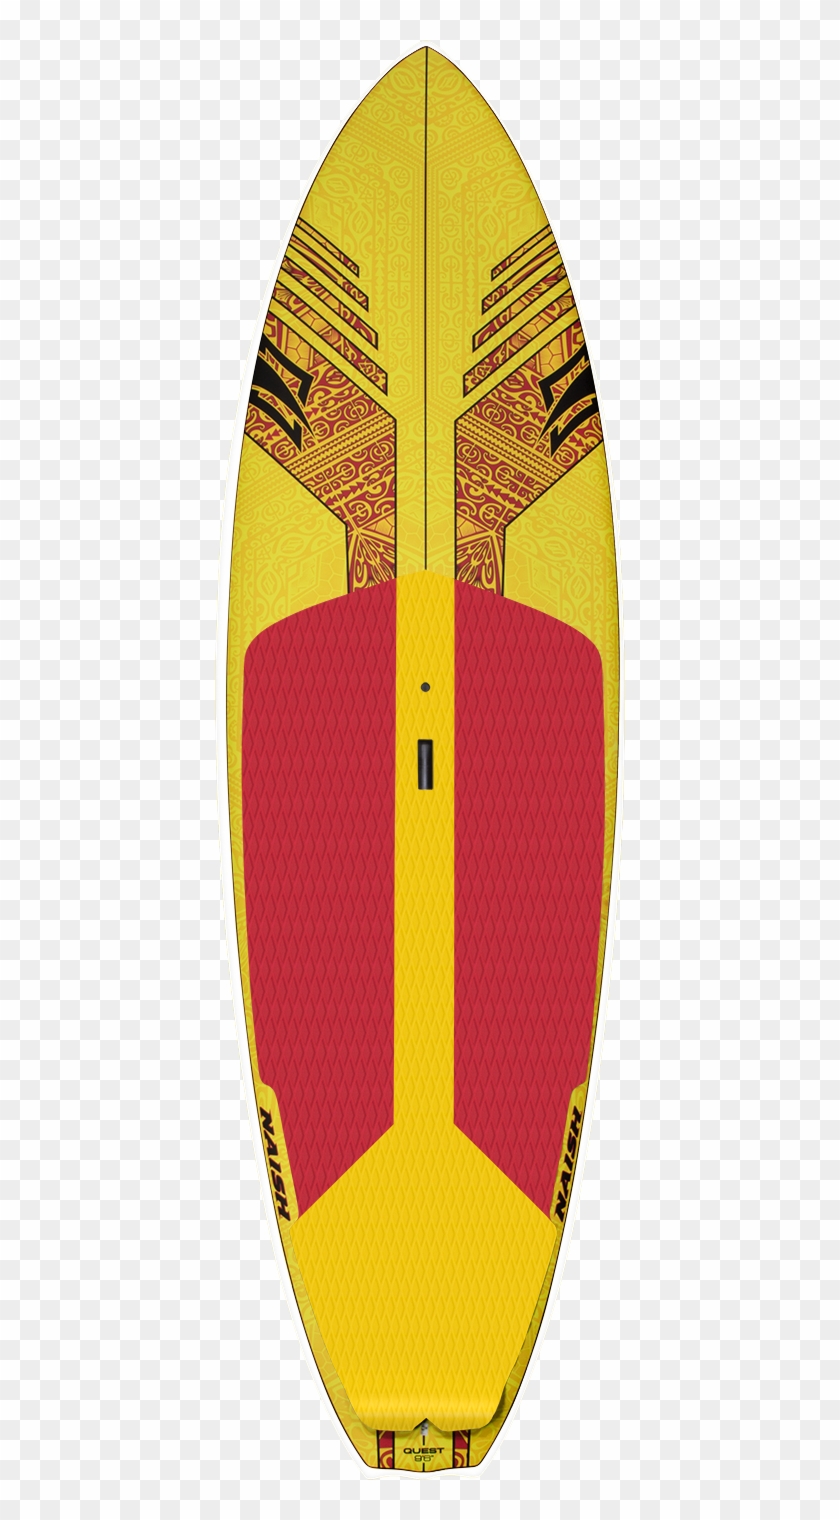 2017sup Productphotos Quest 9 6 S Deck - Naish / Quest S / Sup Boards #660892